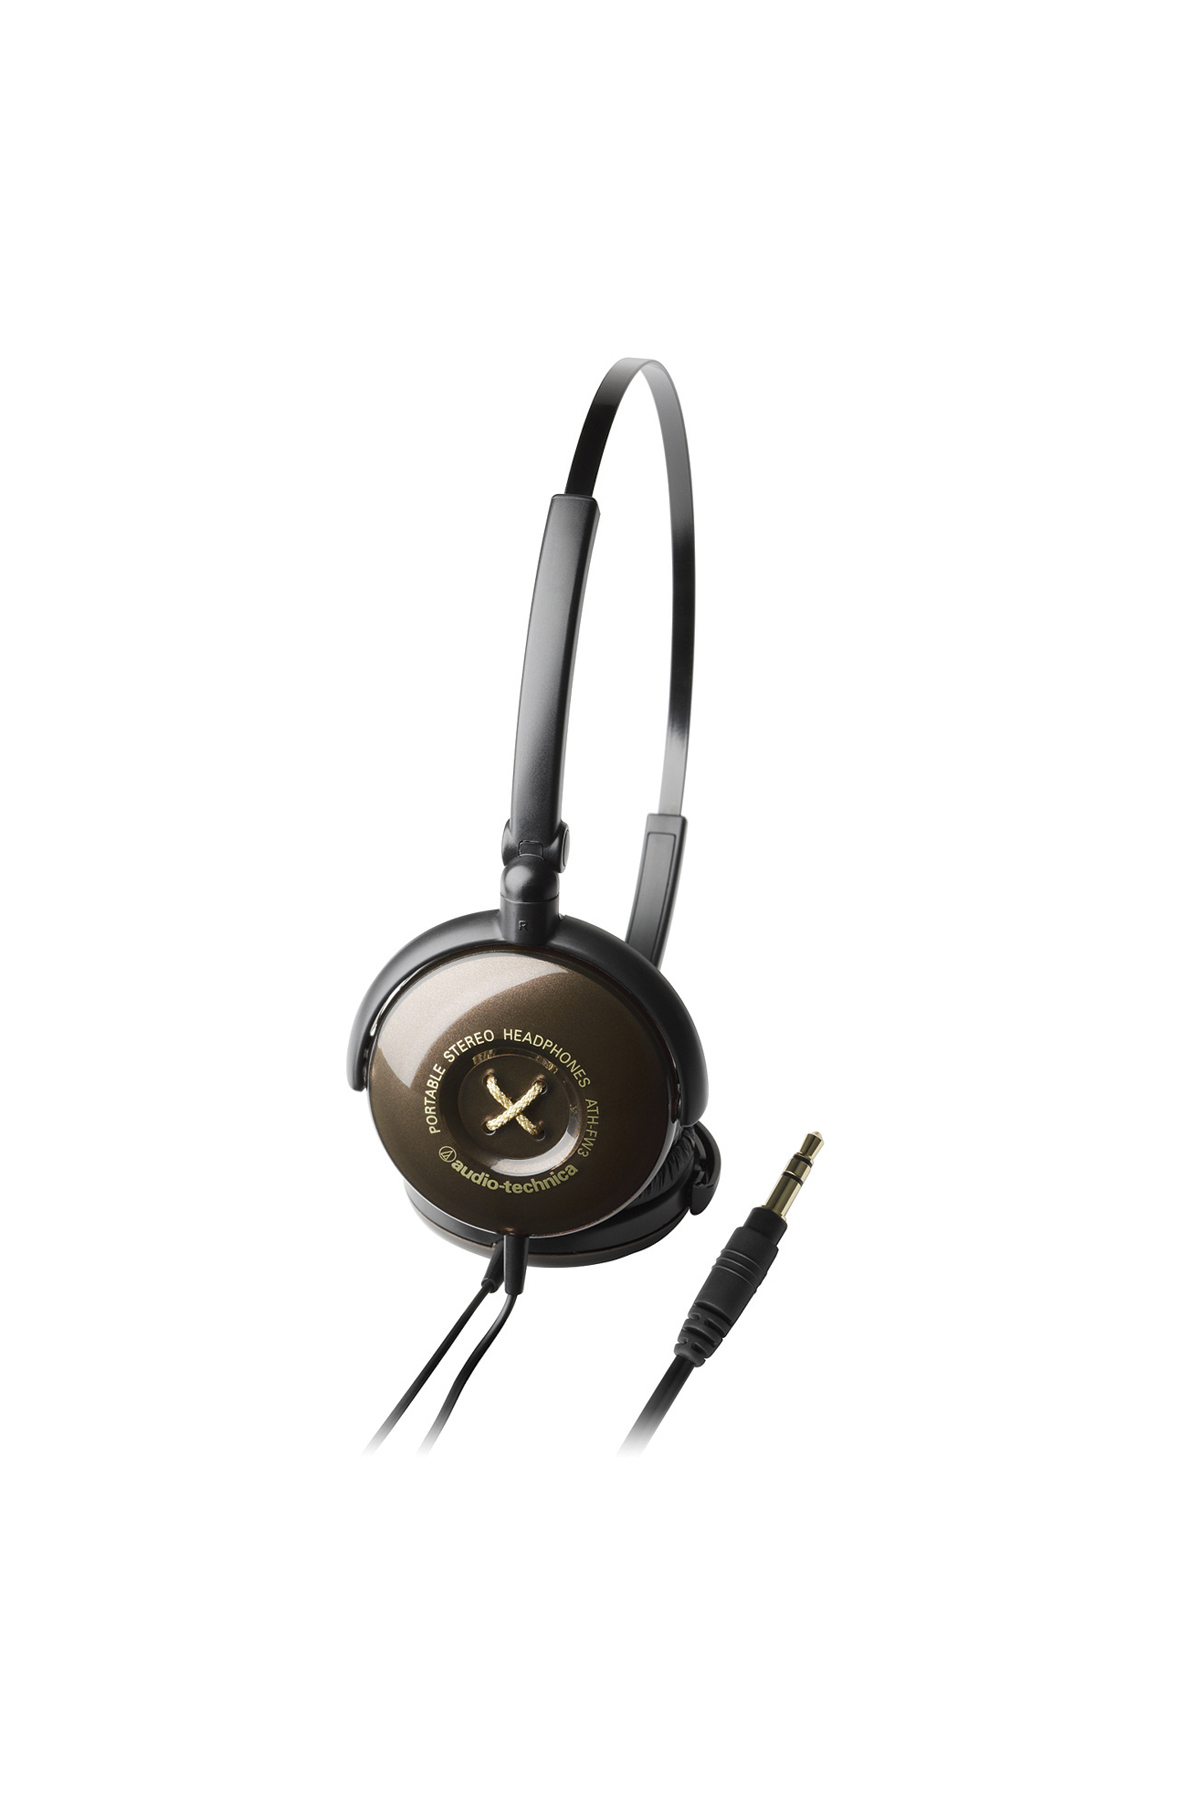 Audio-Technica Audio Technica ATHFW3 Headphones with Carrying Pouch - Brown